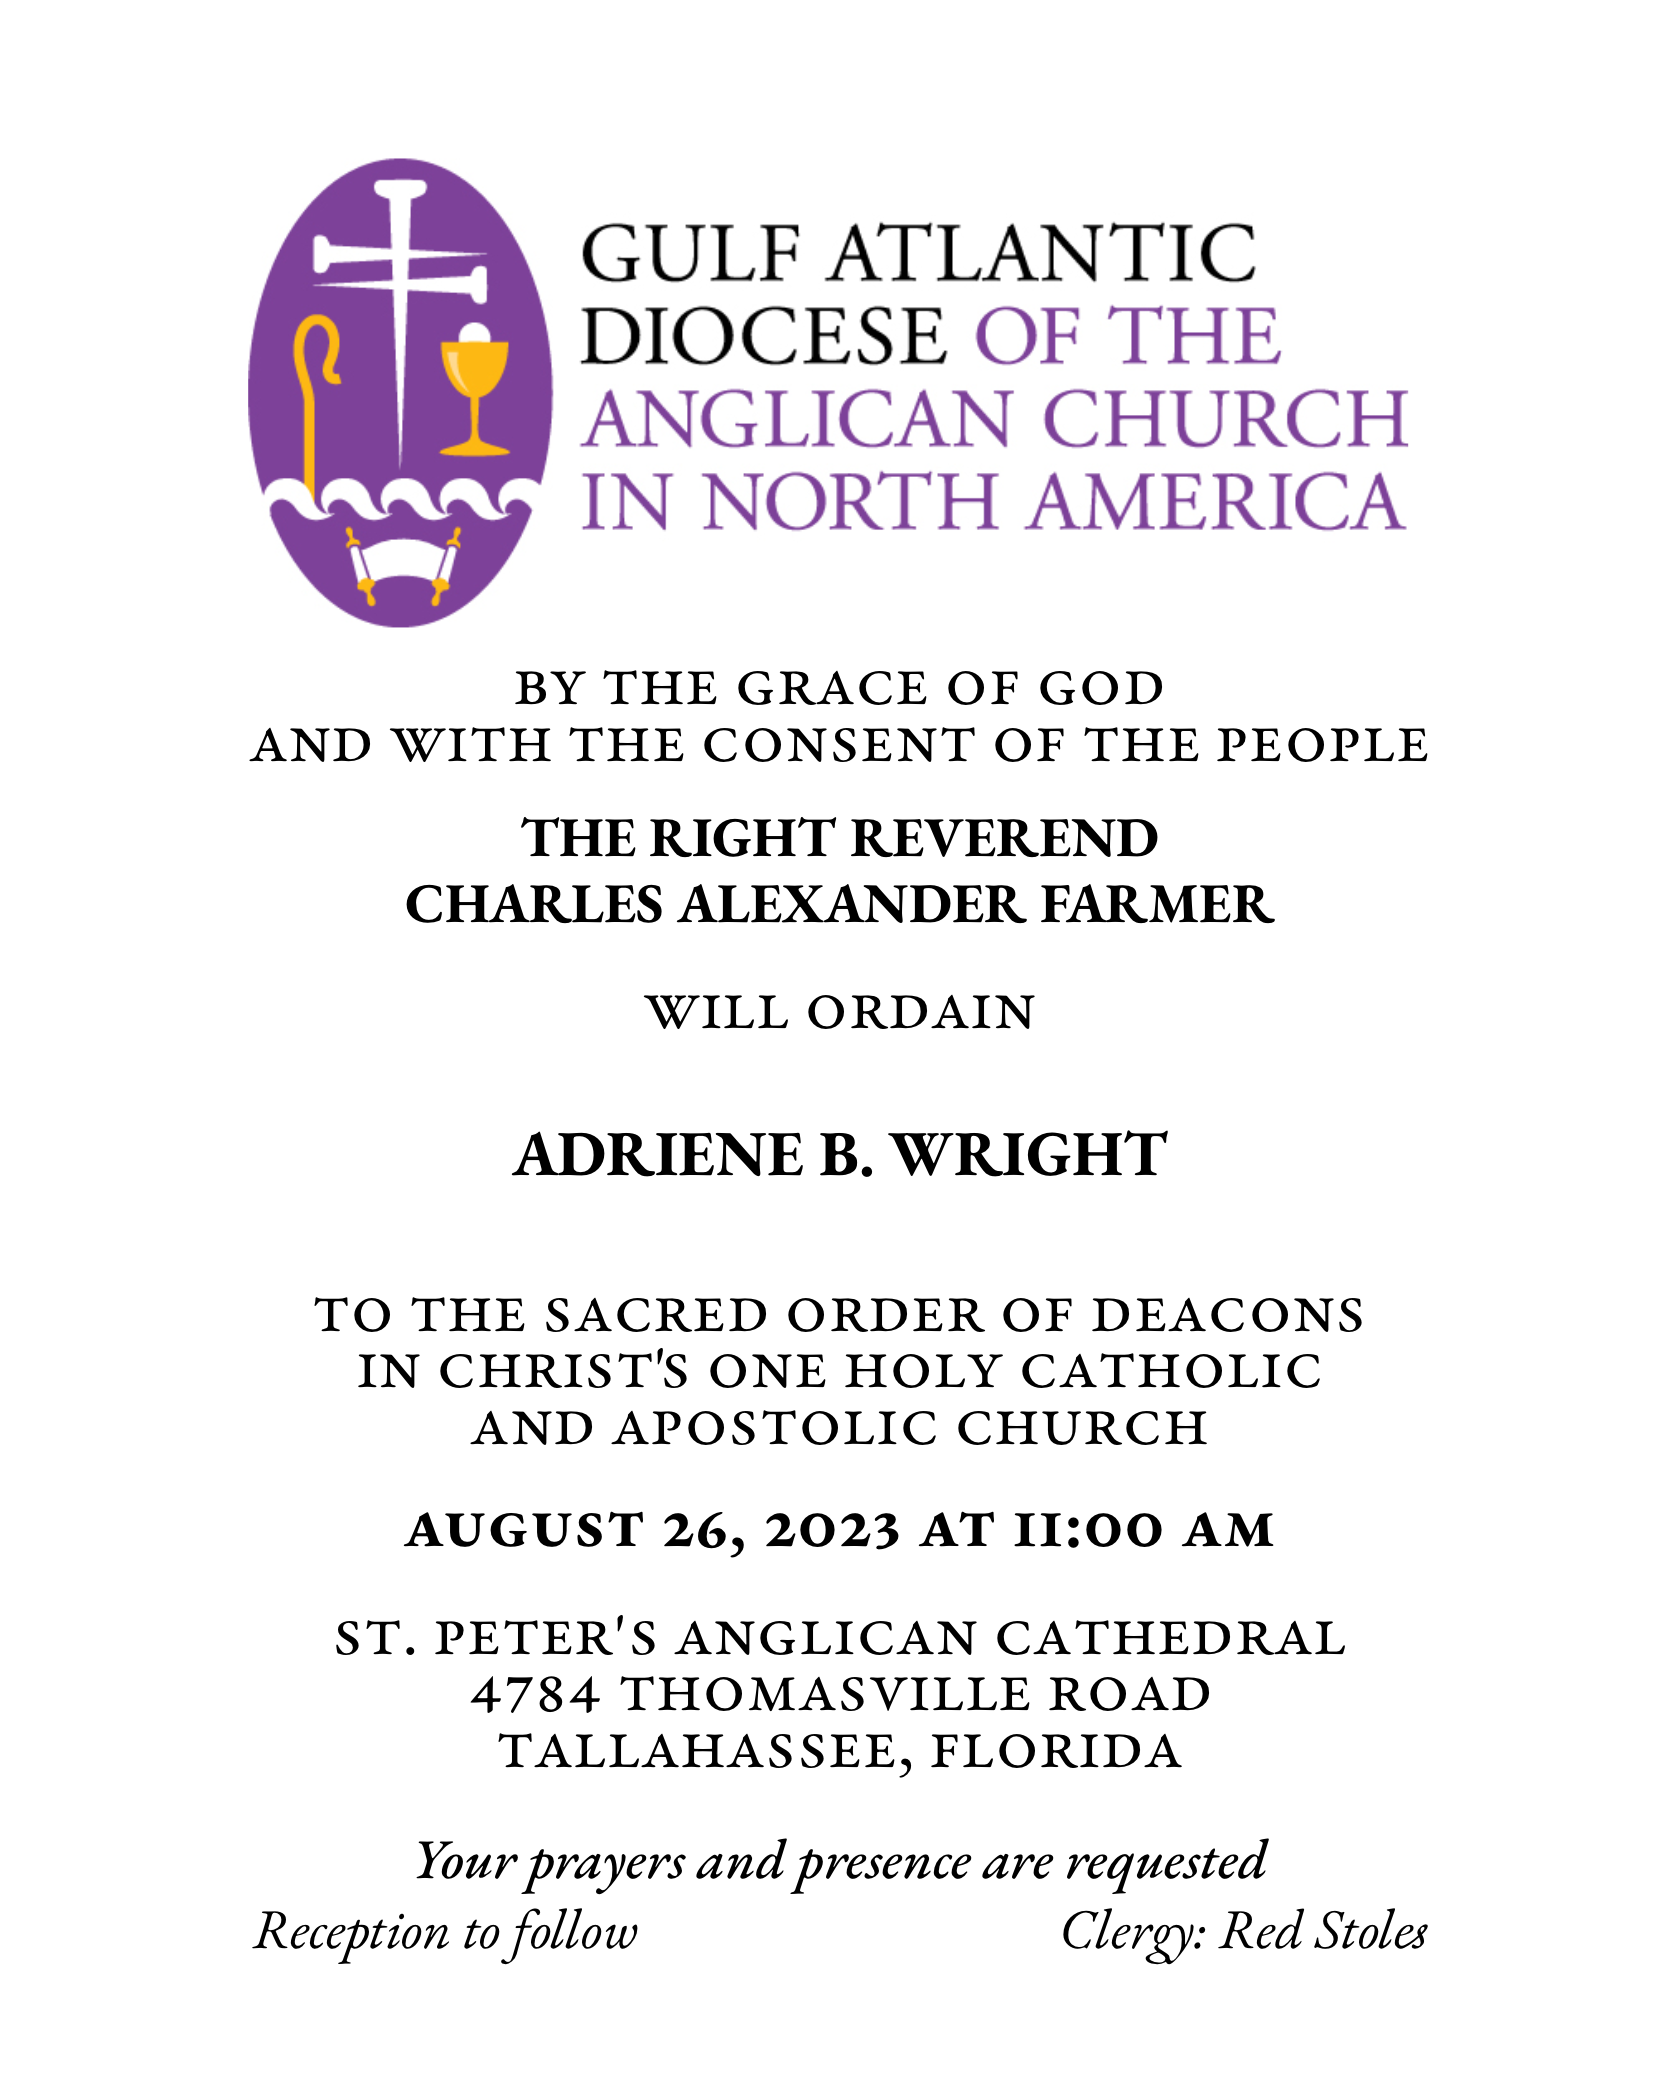 BY THE GRACE OF GOD
AND WITH THE CONSENT OF THE PEOPLE
THE RIGHT REVEREND
CHARLES ALEXANDER FARMER
WILL ORDAIN
ADRIENE B. WRIGHT
TO THE SACRED ORDER OF DEACONS IN CHRIST'S ONE HOLY CATHOLIC
AND APOSTOLIC CHURCH
AUGUST 26, 2023 AT I1:00 AM
ST. PETER'S ANGLICAN CATHEDRAL
4784 THOMASVILLE ROAD
TALLAHASSEE, FLORIDA
Your bravers and presence are requested
Reception to follow
Clergy: Red Stoles